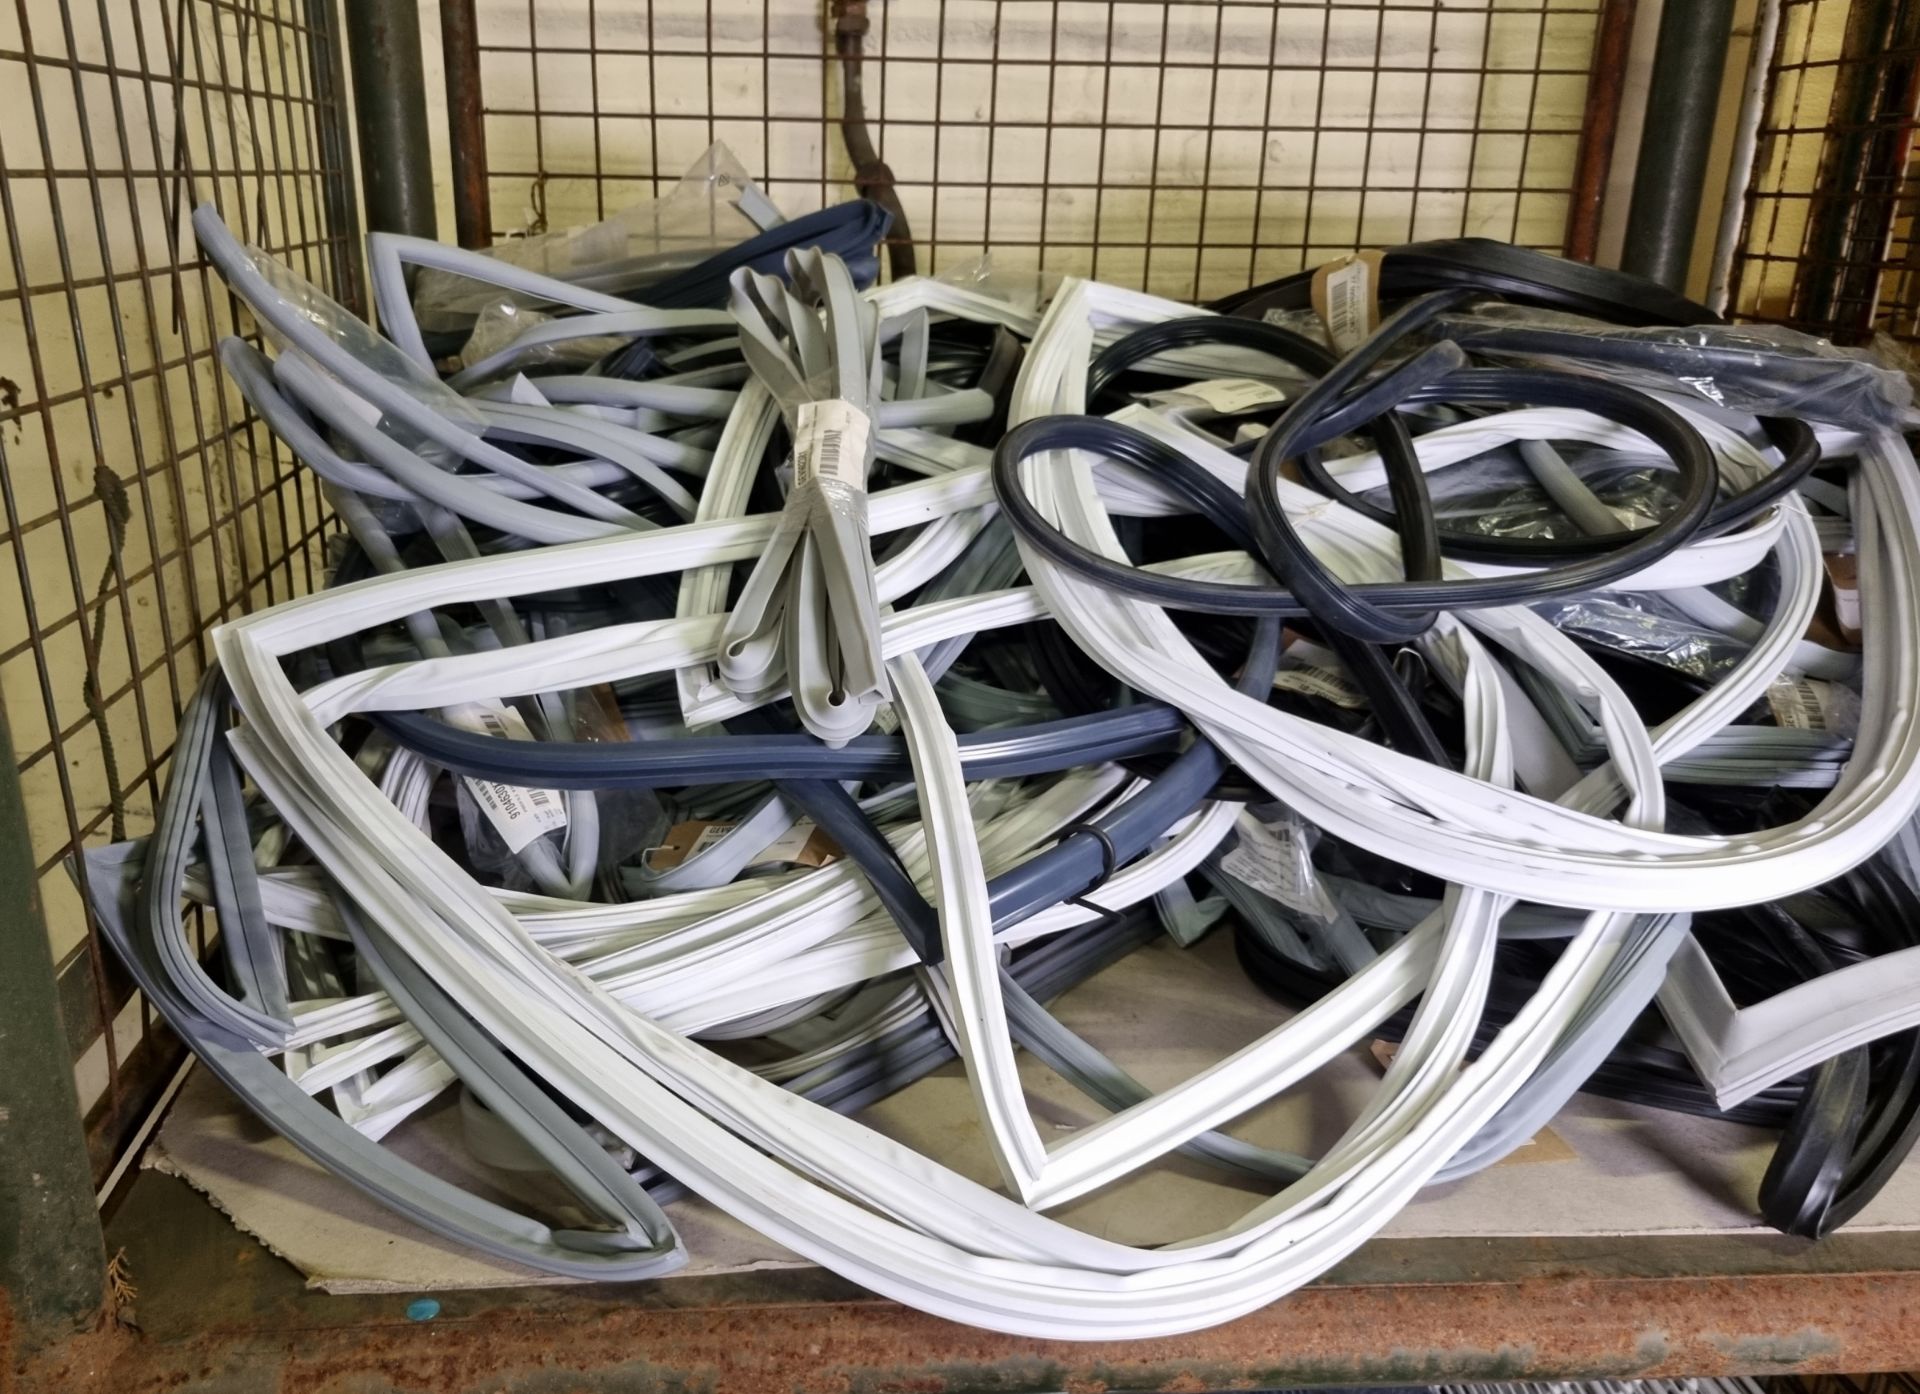 Rubber door seal gaskets - mixed sizes - approximately 90 pieces - Image 3 of 3